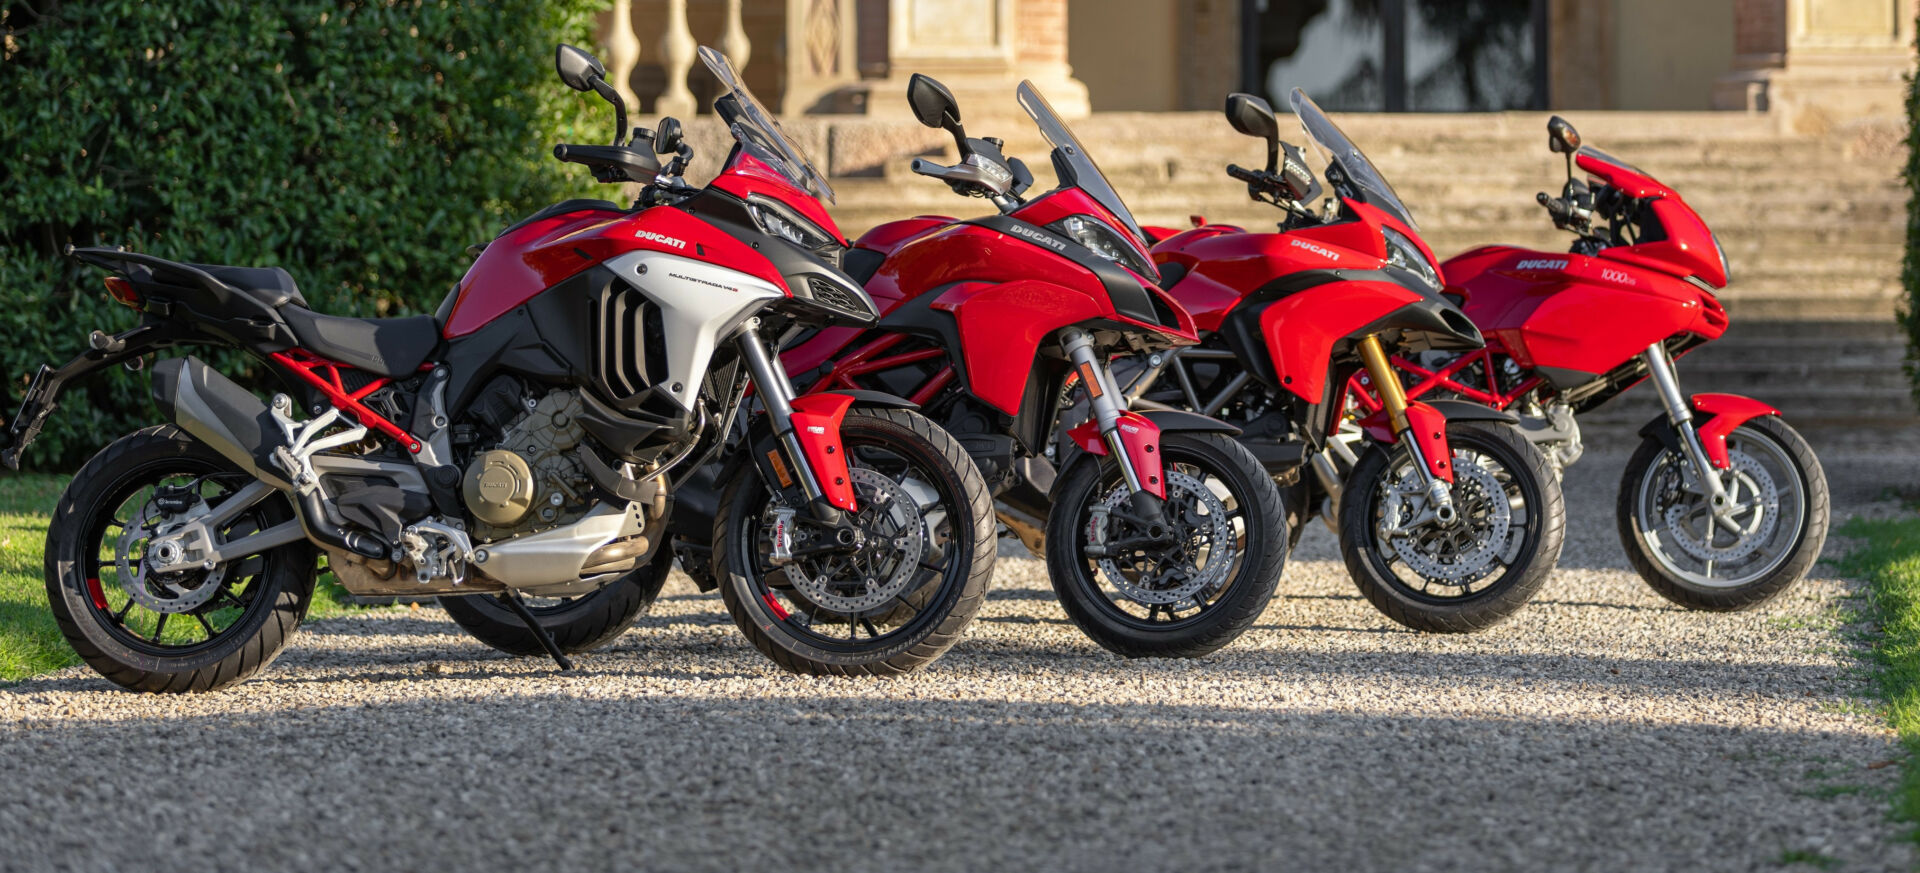 Examples of the different Ducati Multistrada models with the current Multistrada V4 S in the foreground. Photo courtesy Ducati.